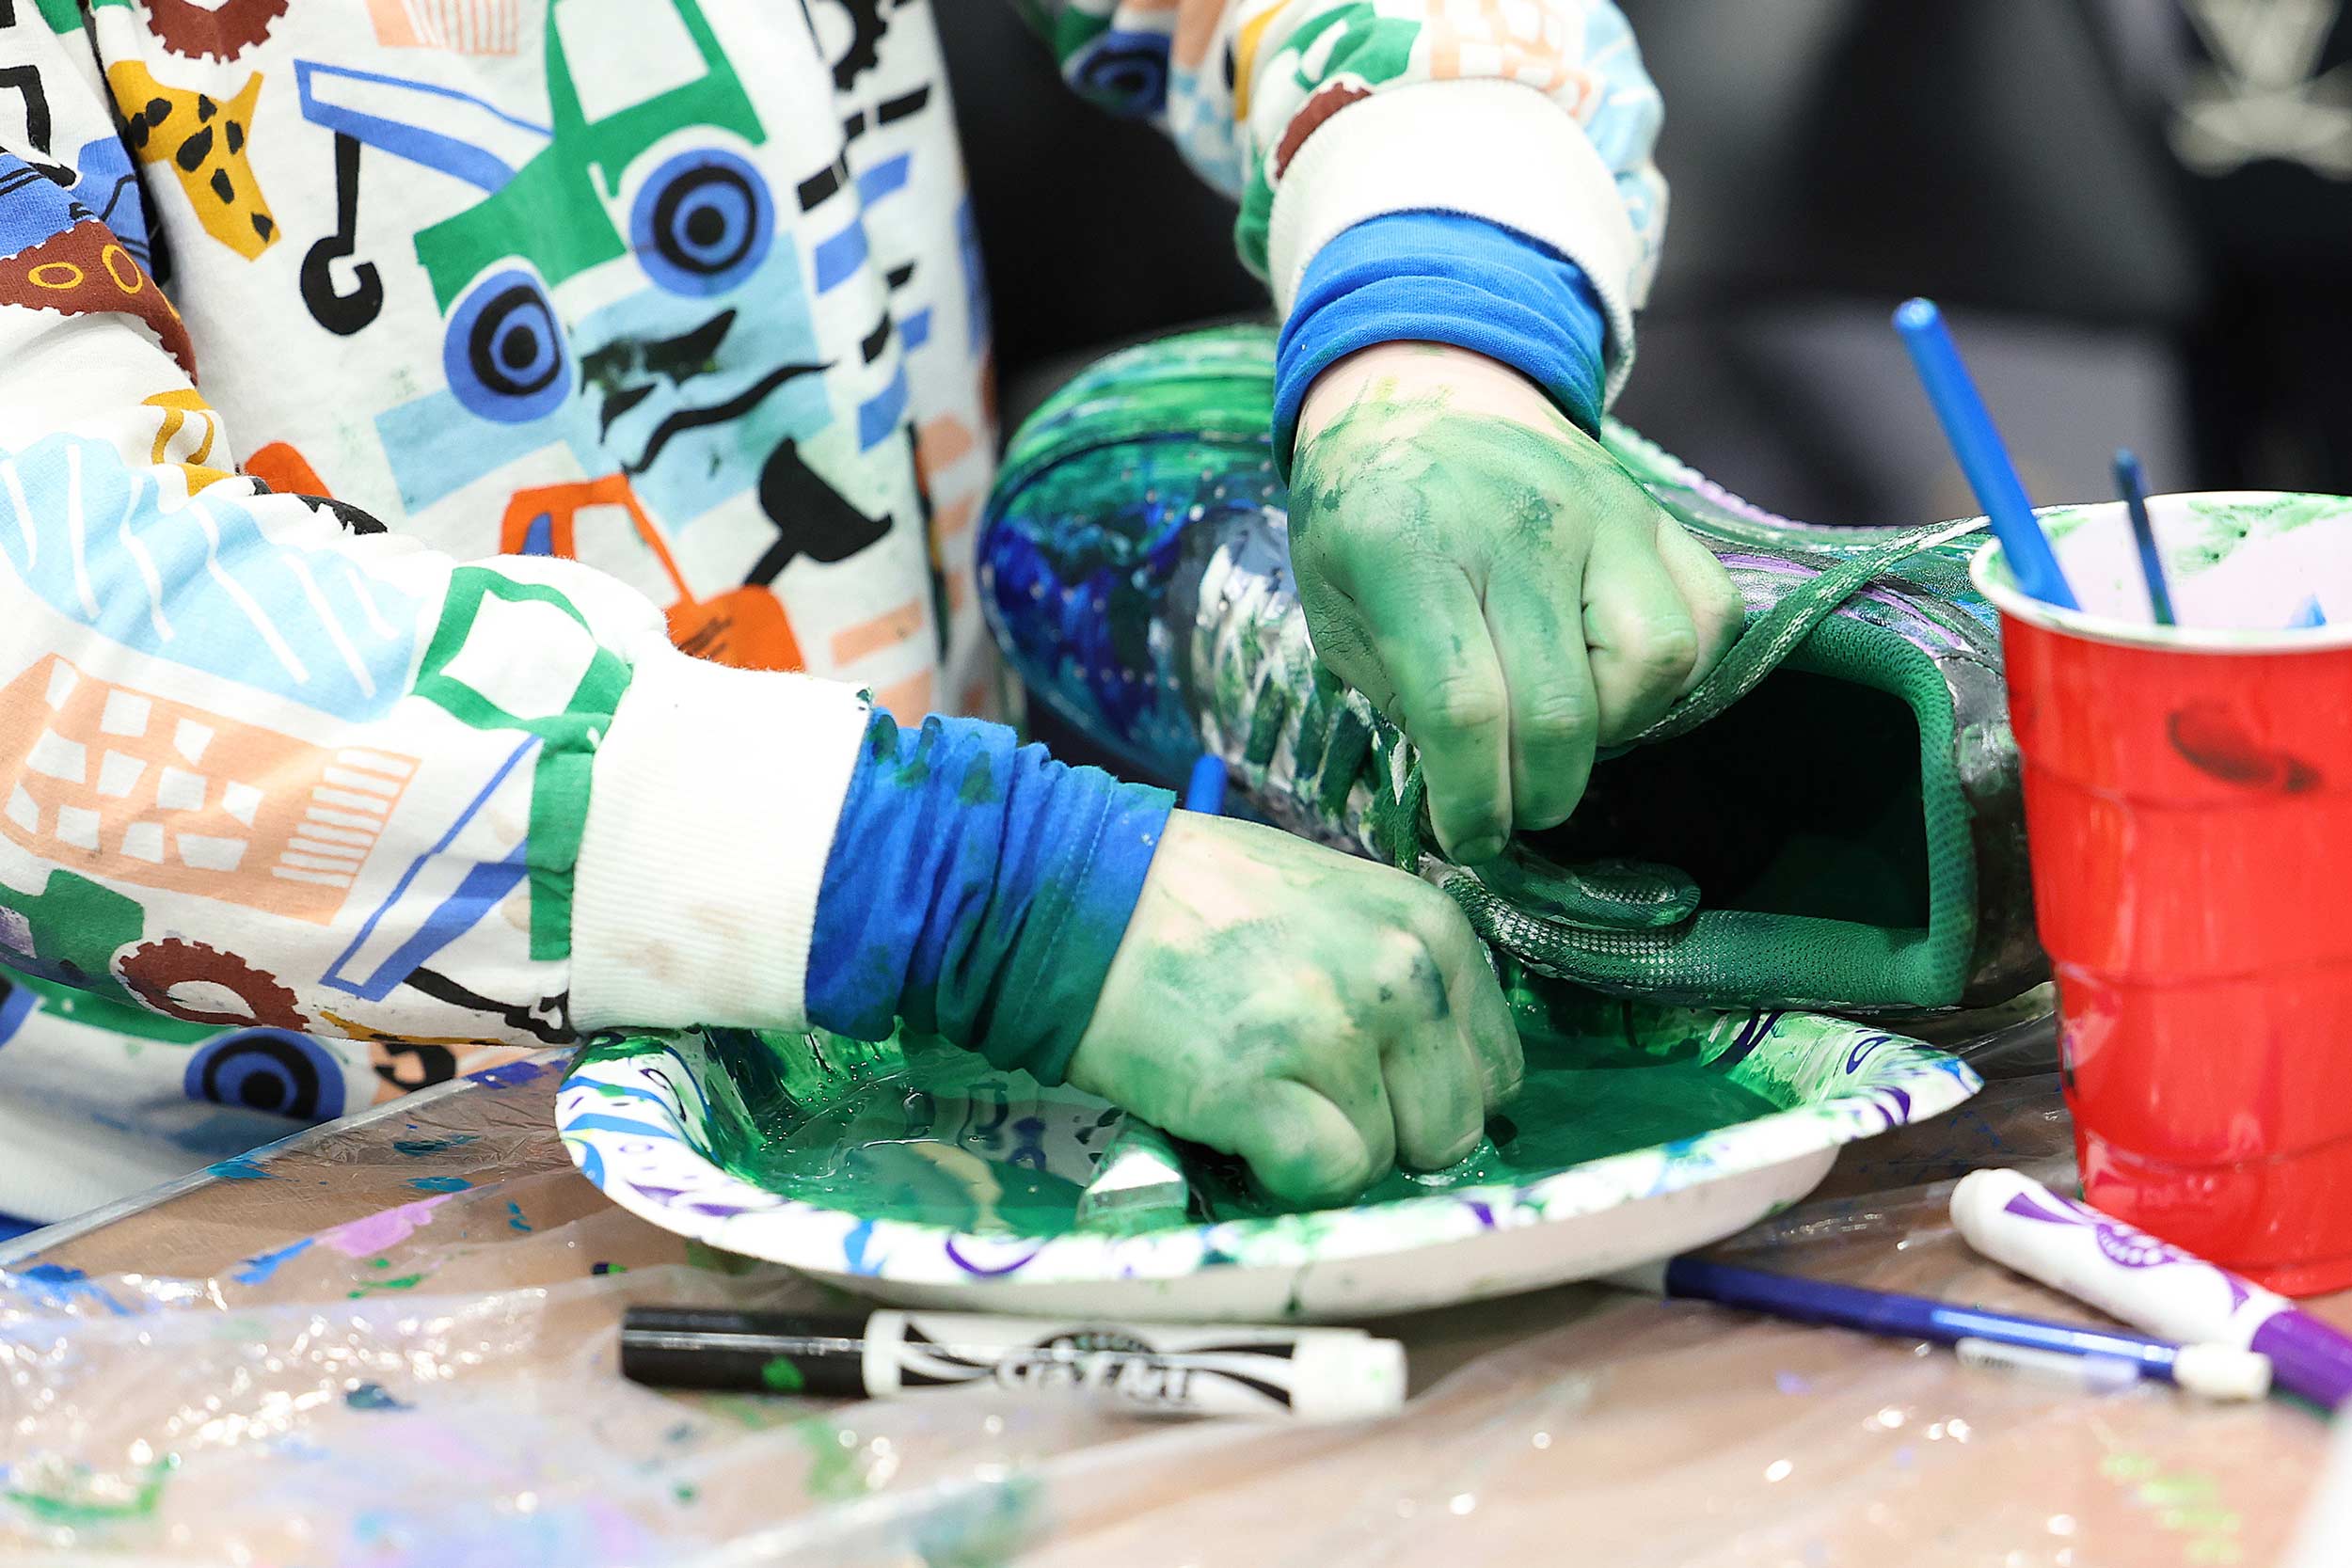 A close up of a shoe being dyed in green paint